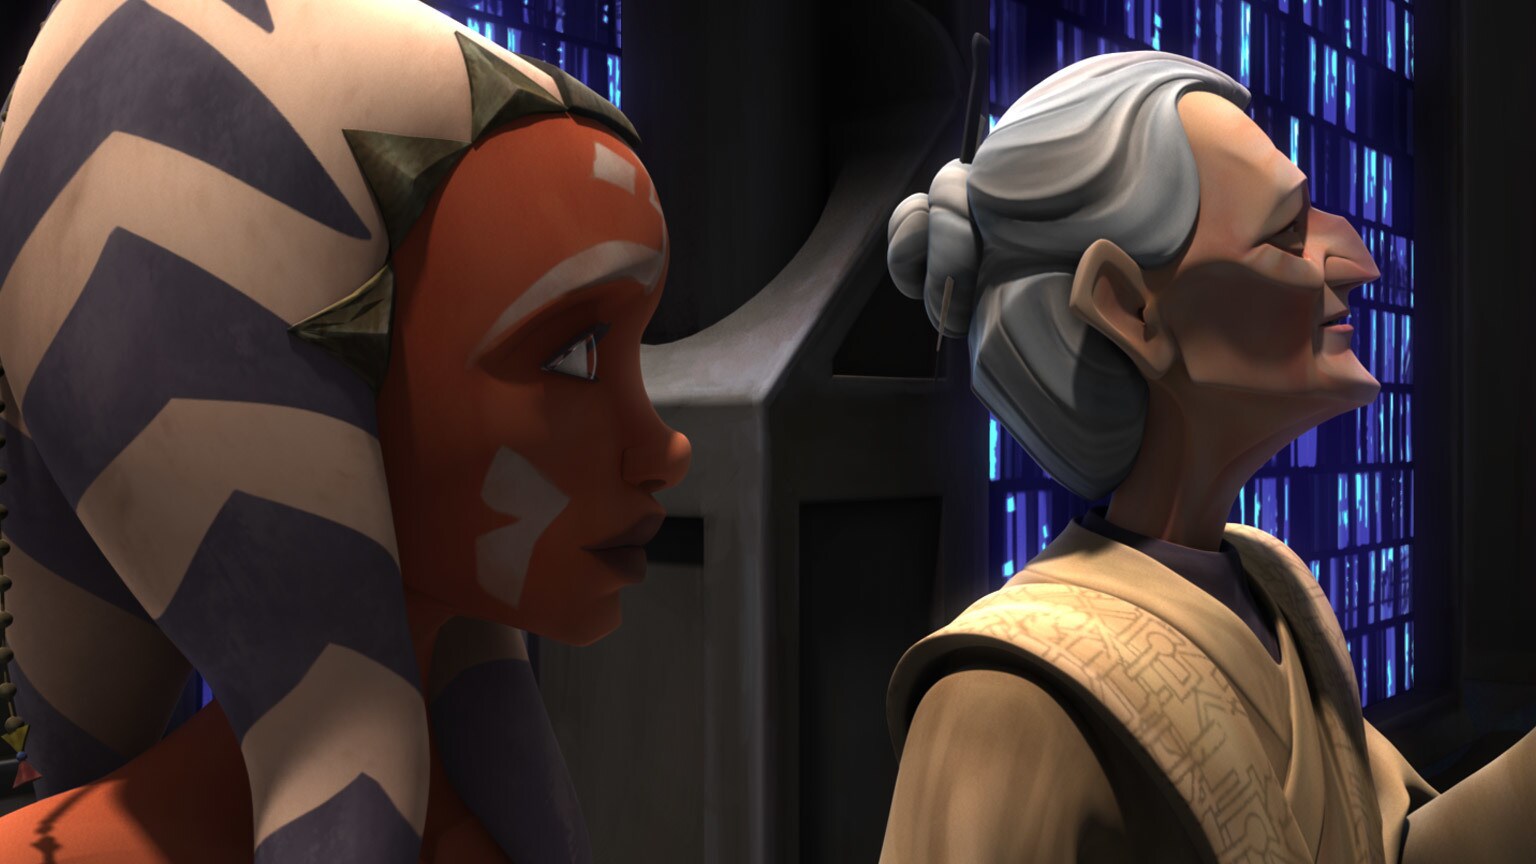 The Clone Wars Rewatch: A Temple Intruder and a "Holocron Heist"